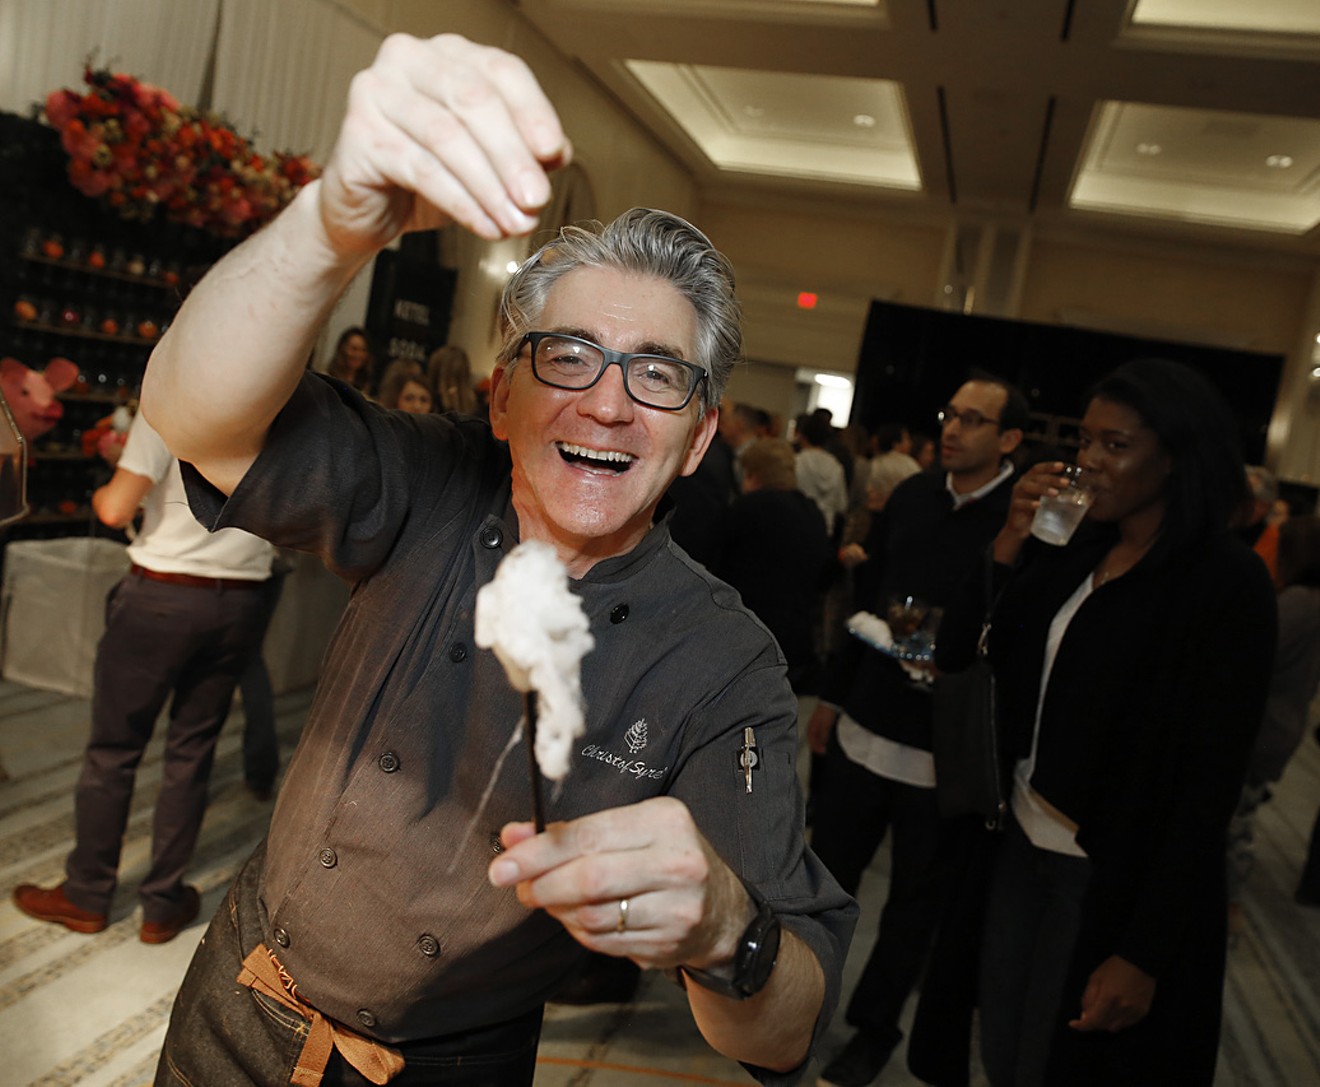 Christof Syré returns to cook in Cochon 555 this year for the Dallas event.